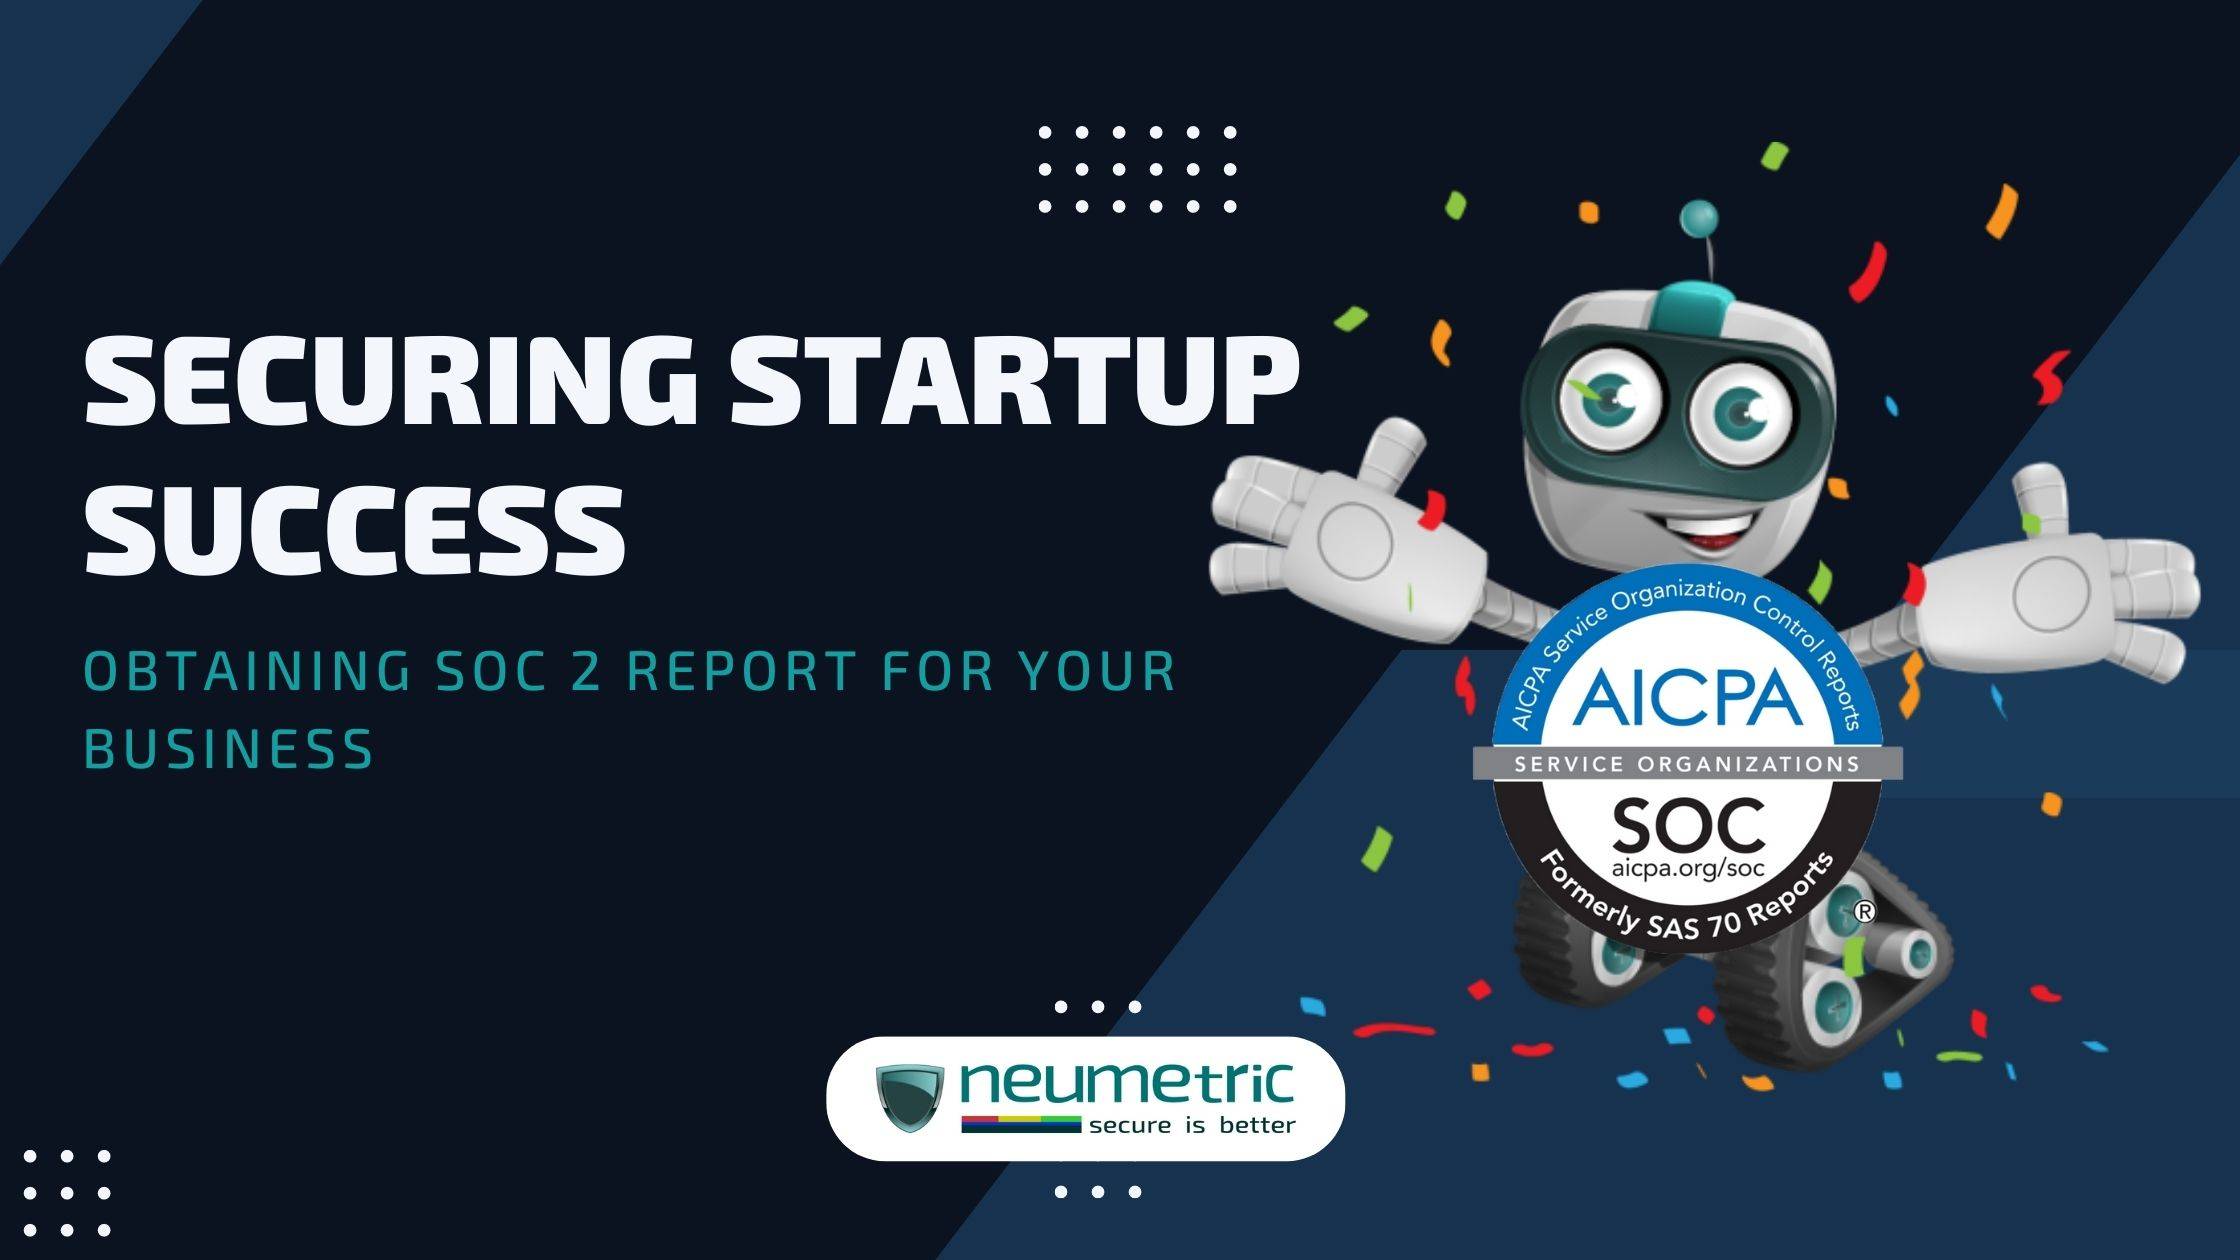 Securing Startup Success: Obtaining SOC 2 Report for your Business